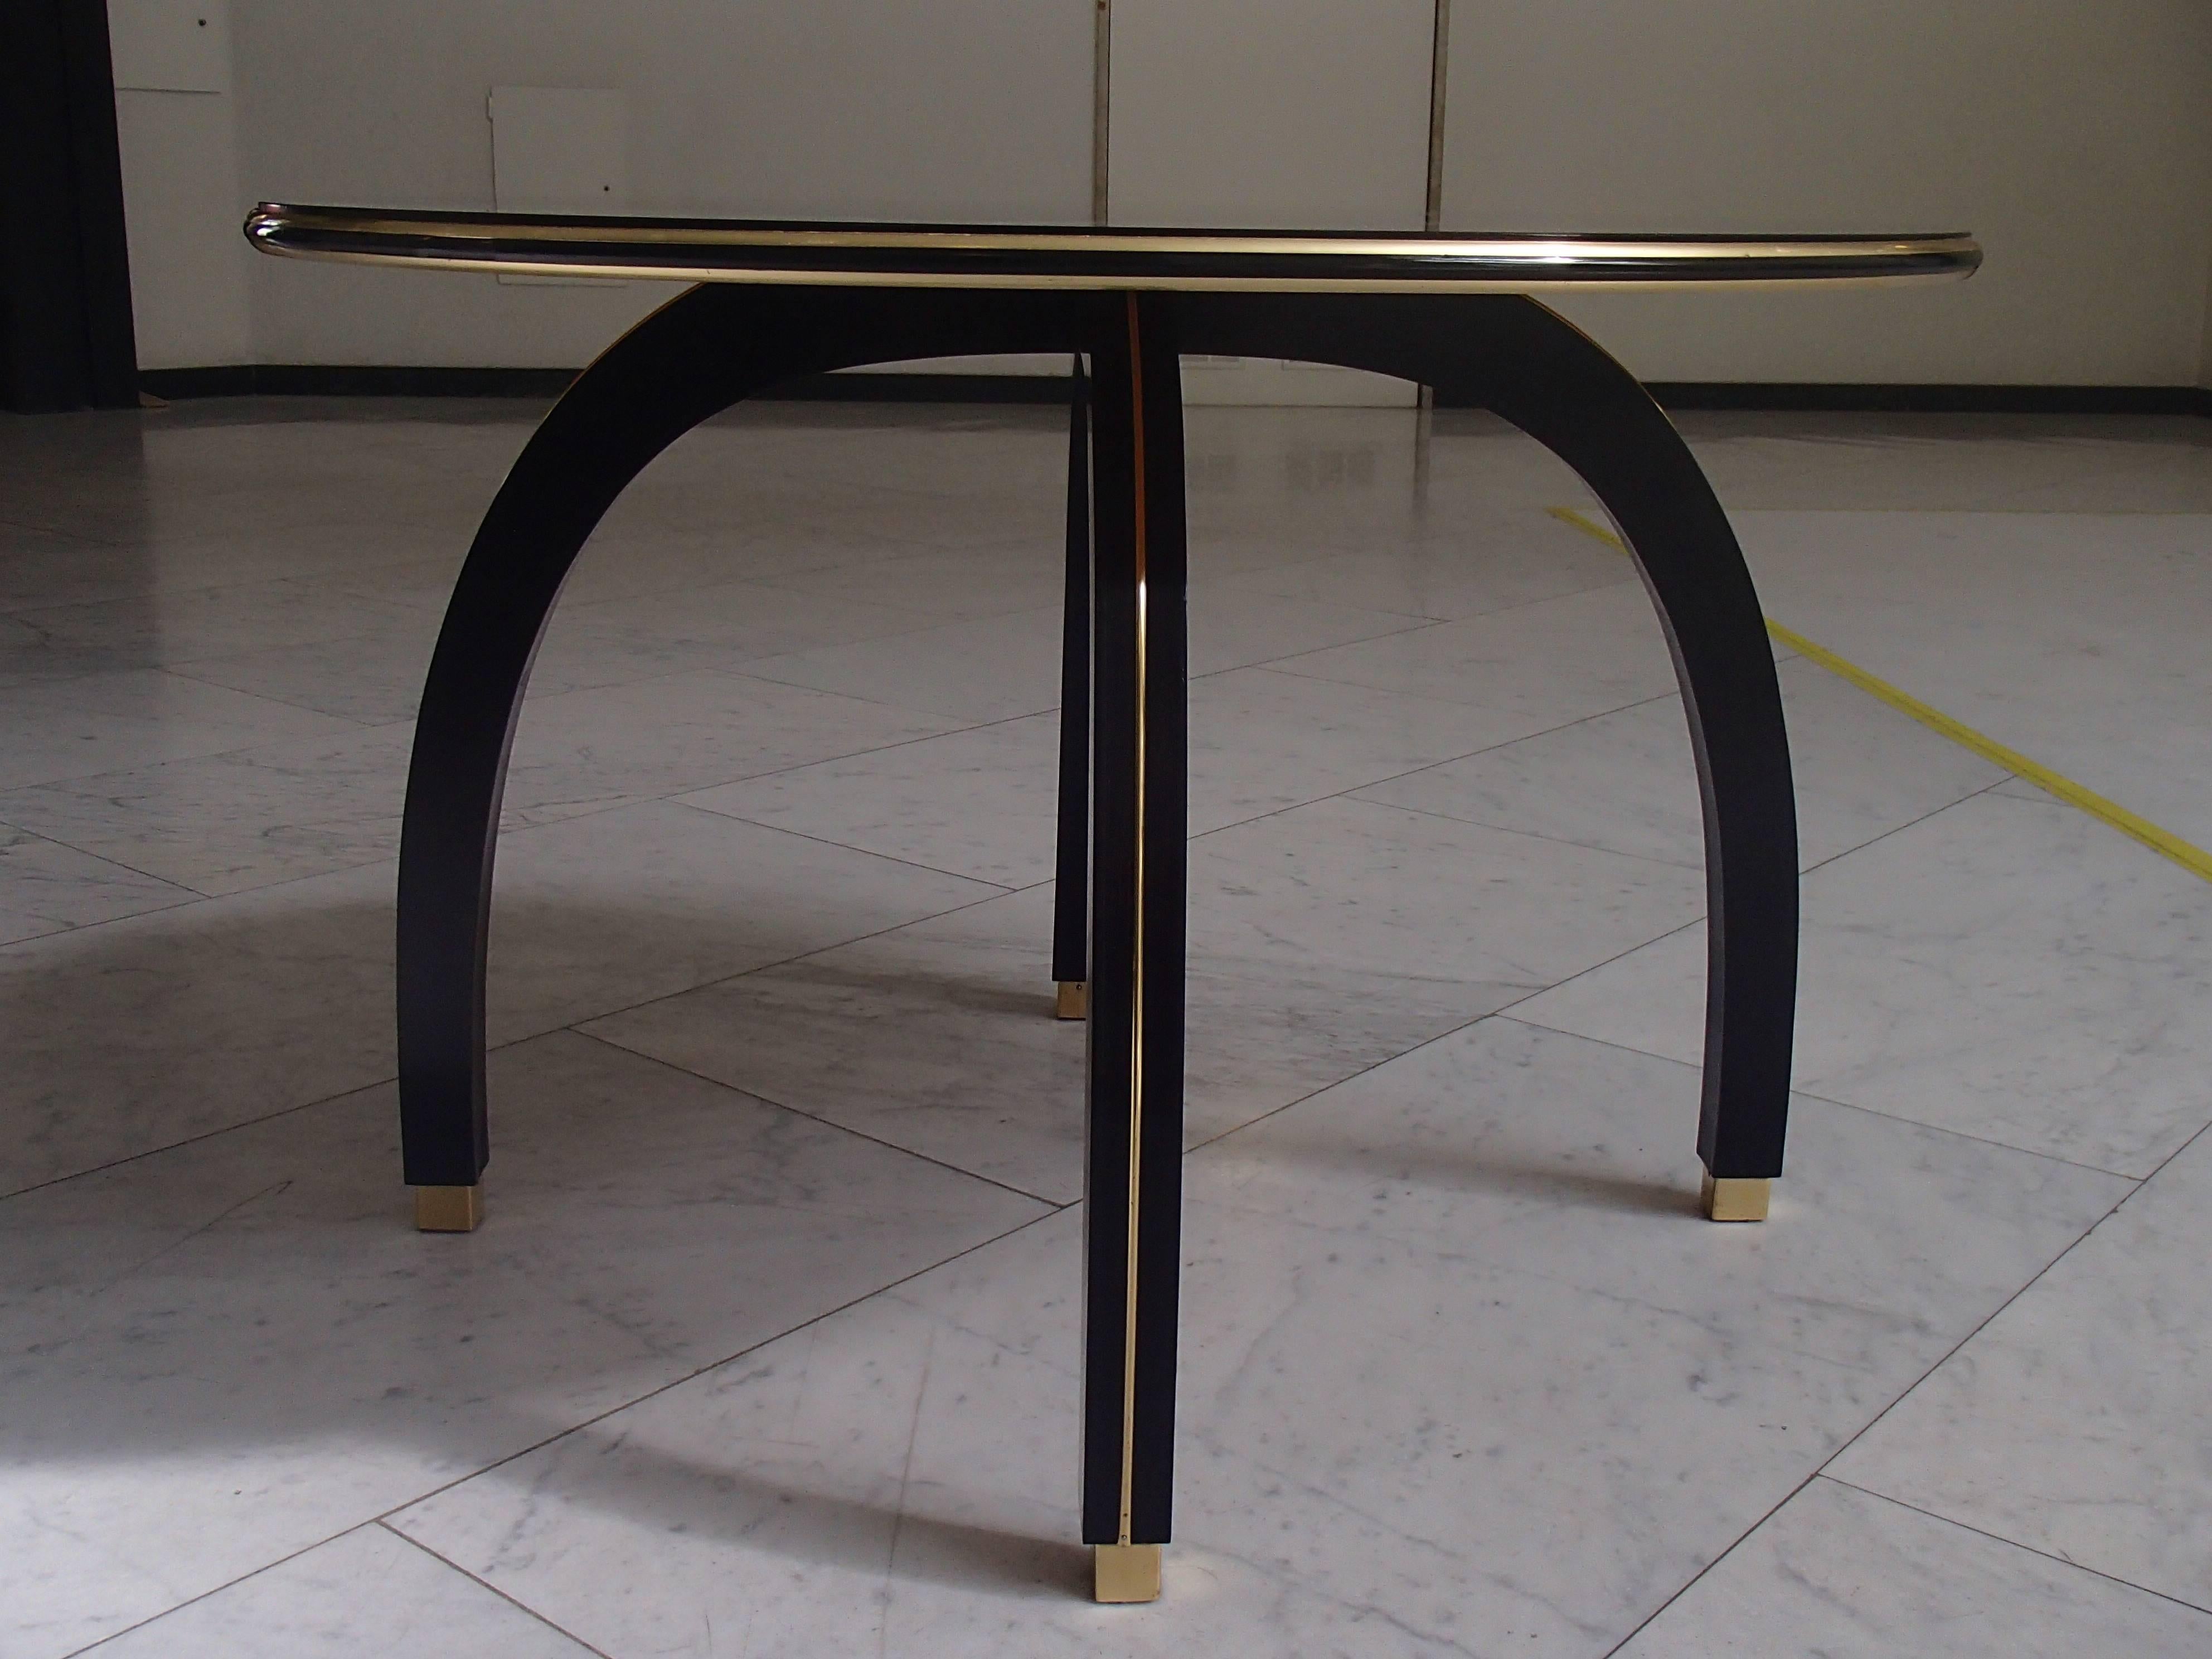 Very elegant round side table with black glass top with brass ornaments and legs.